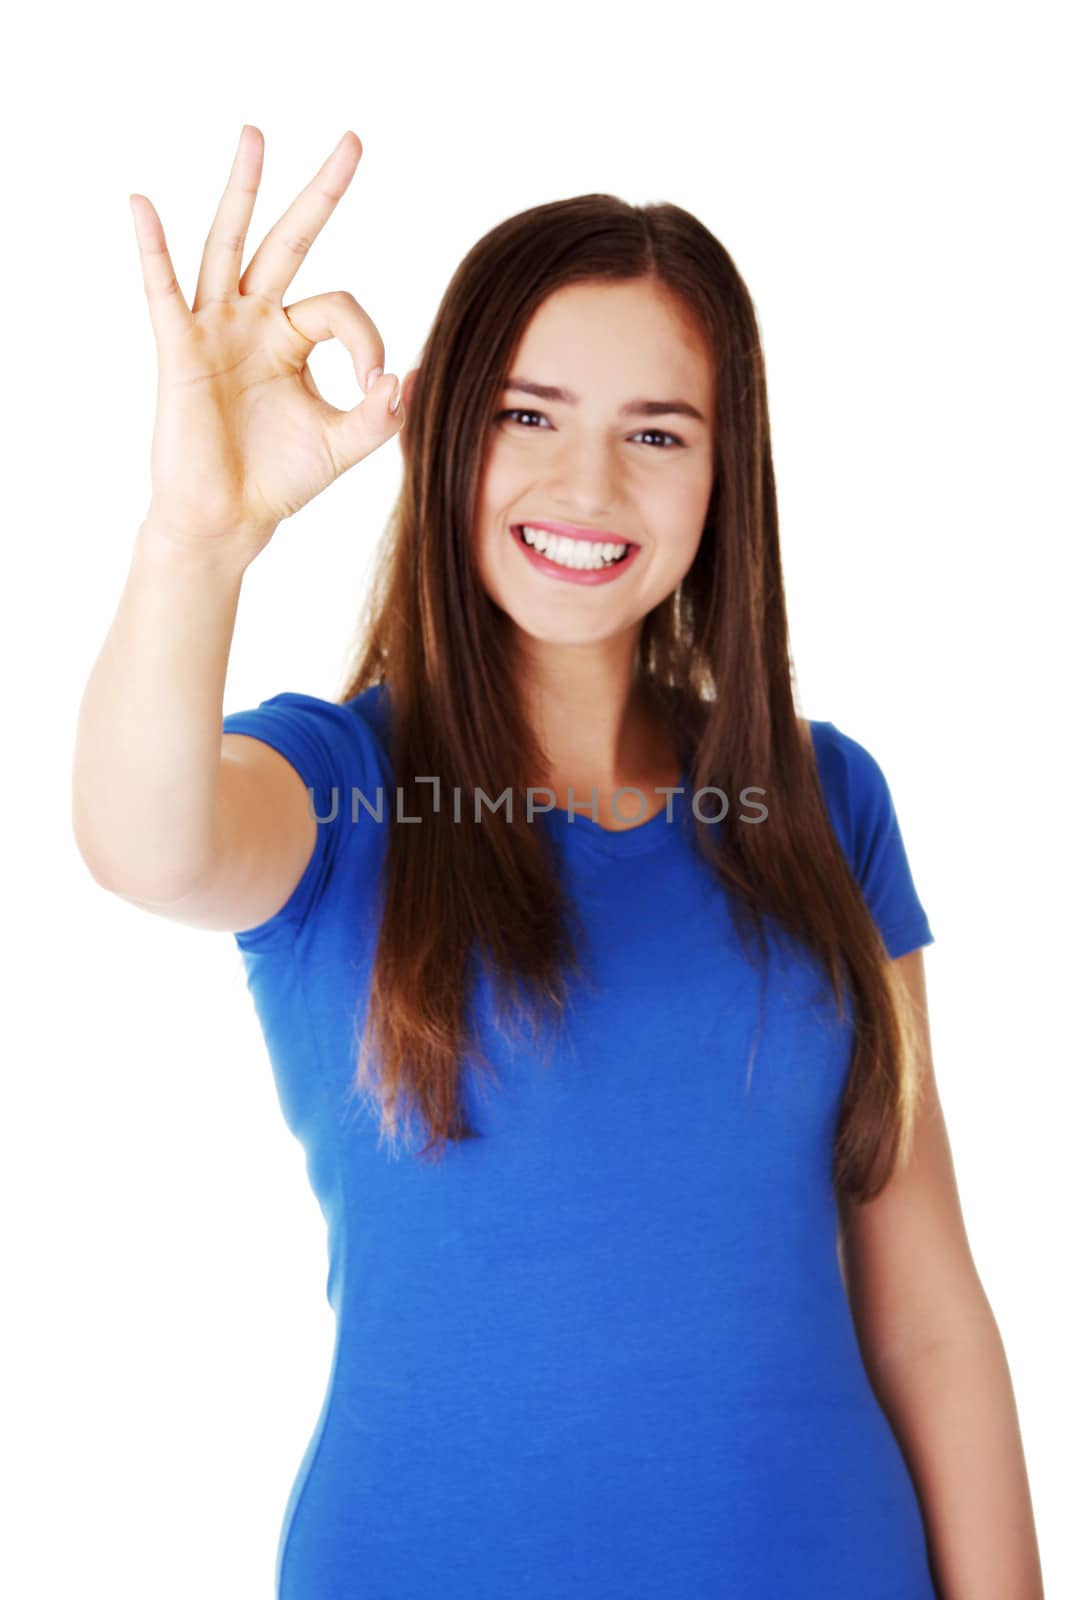 young casual woman student showin OK gesture. Isolated on white.